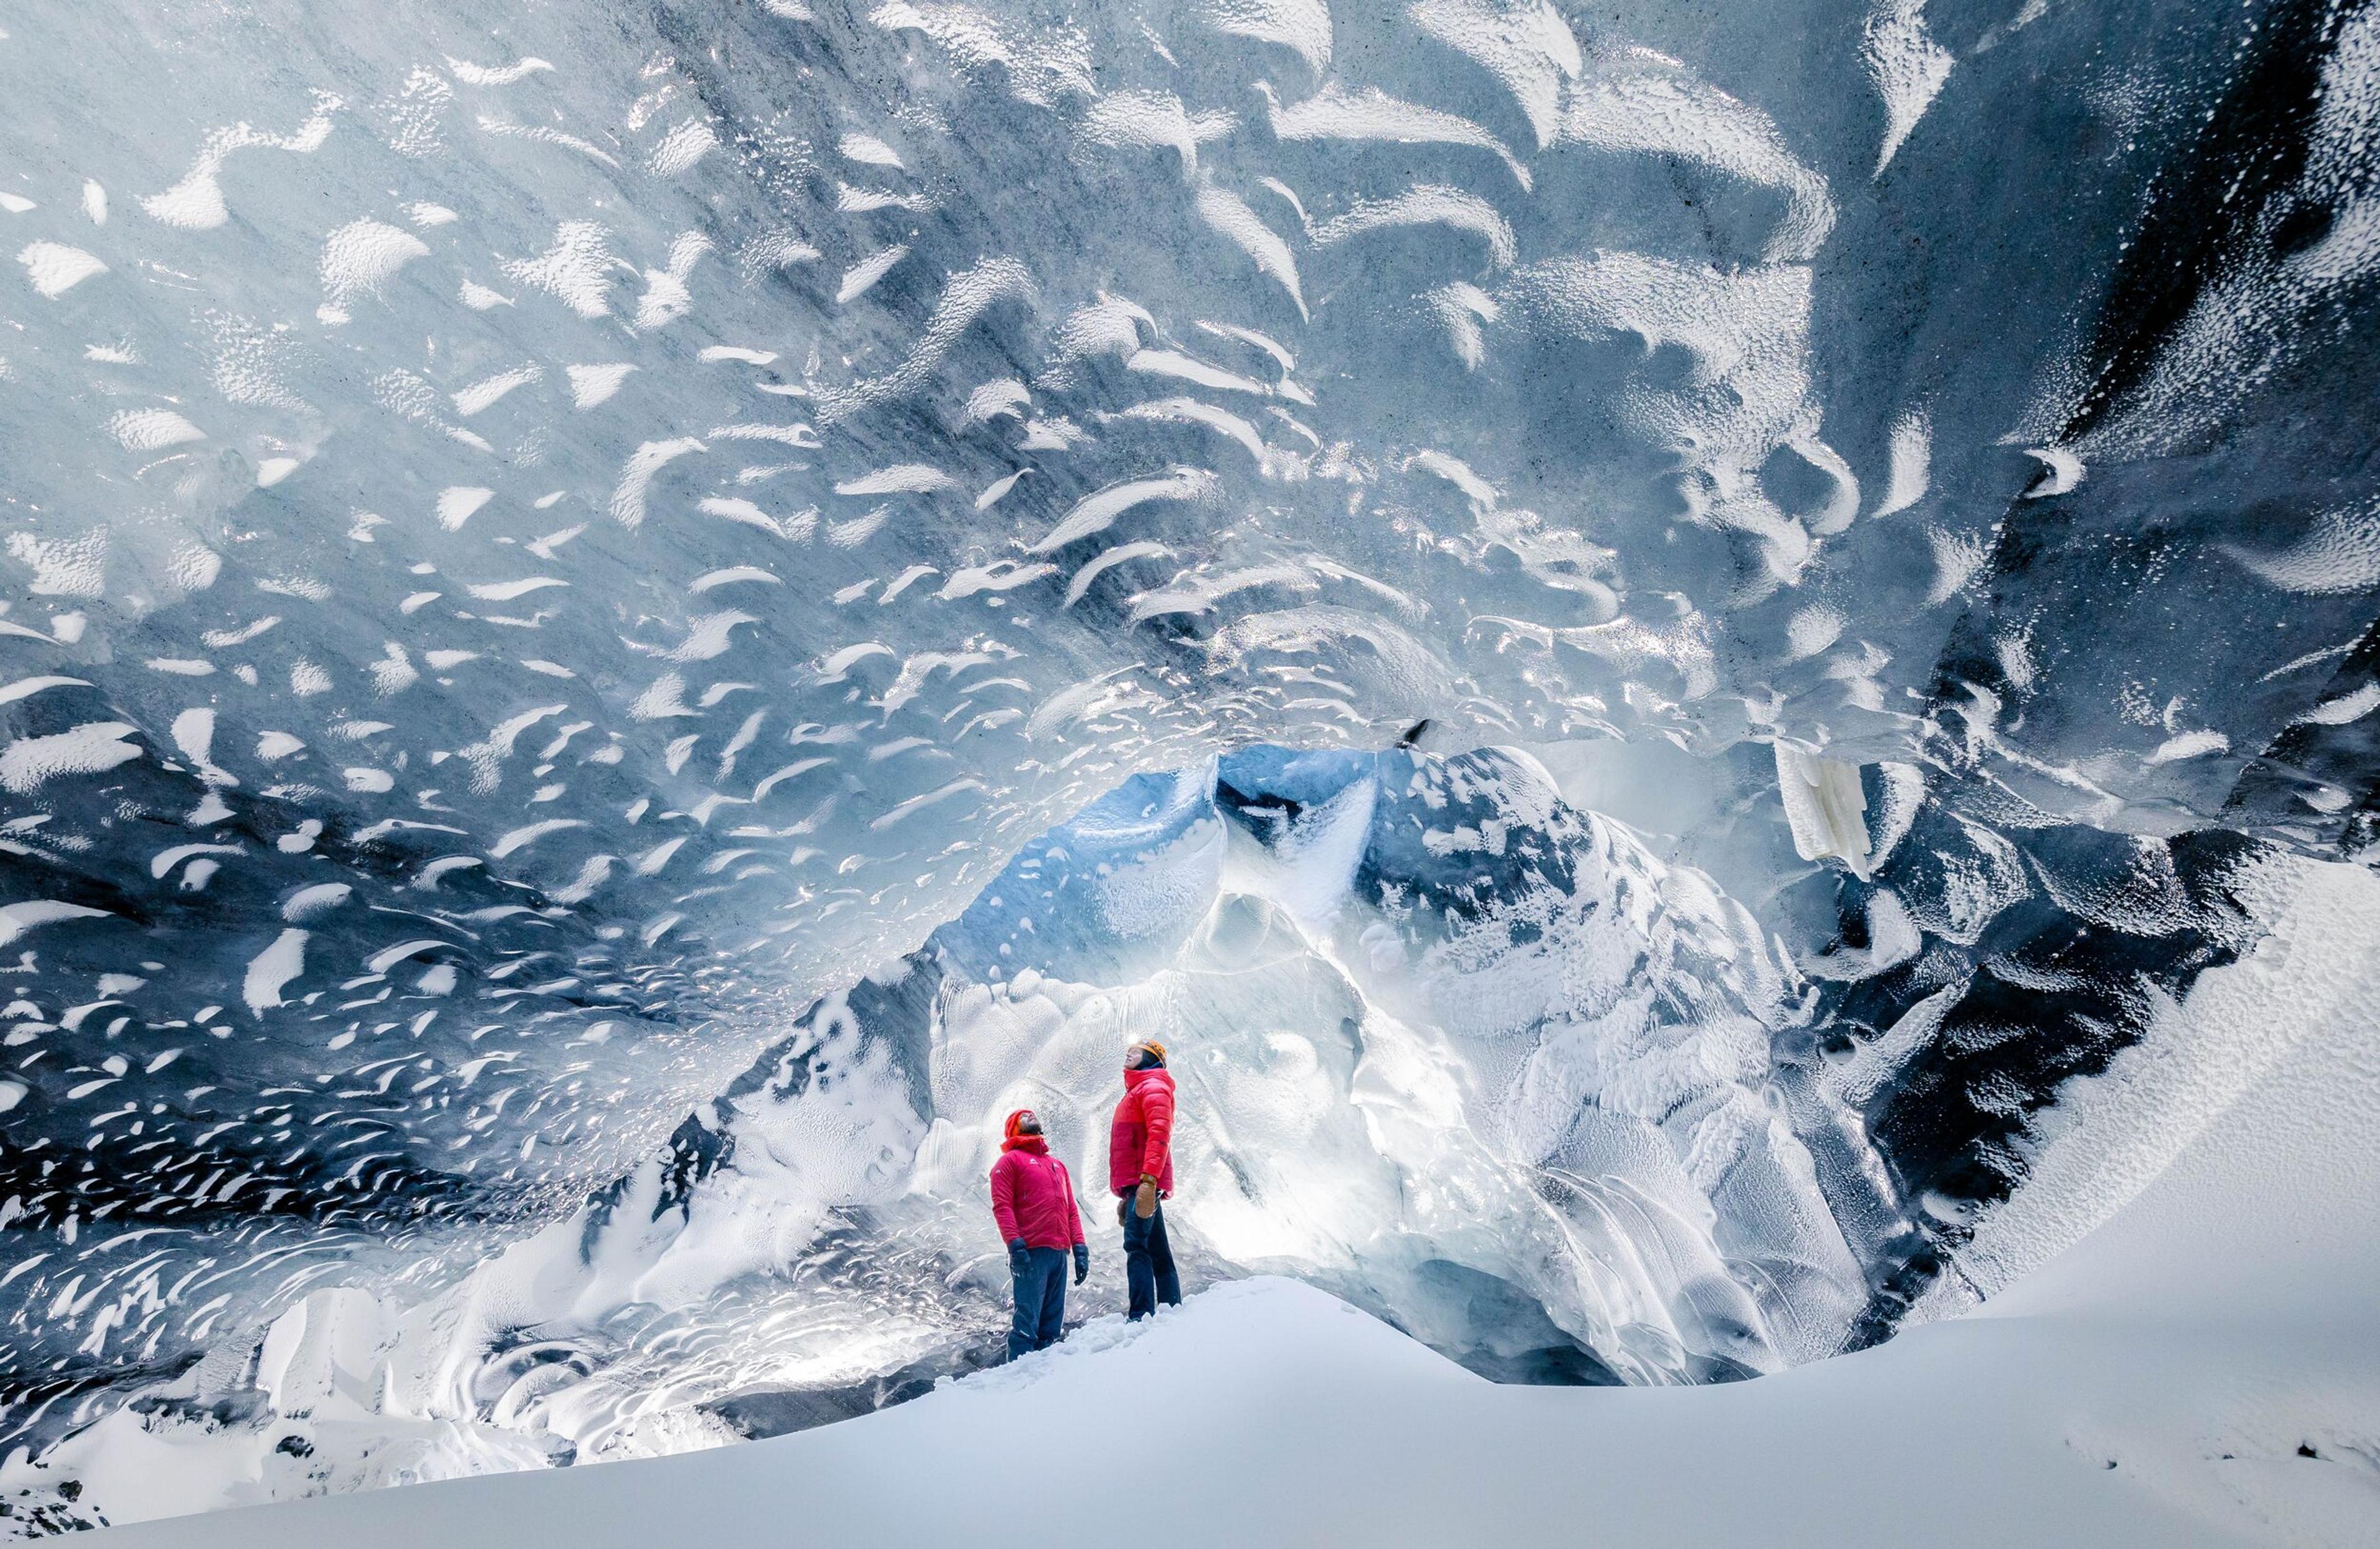 Two explorers in red jackets standing inside a vast ice cave with intricate frost patterns on the ceiling, highlighting nature's artistry.